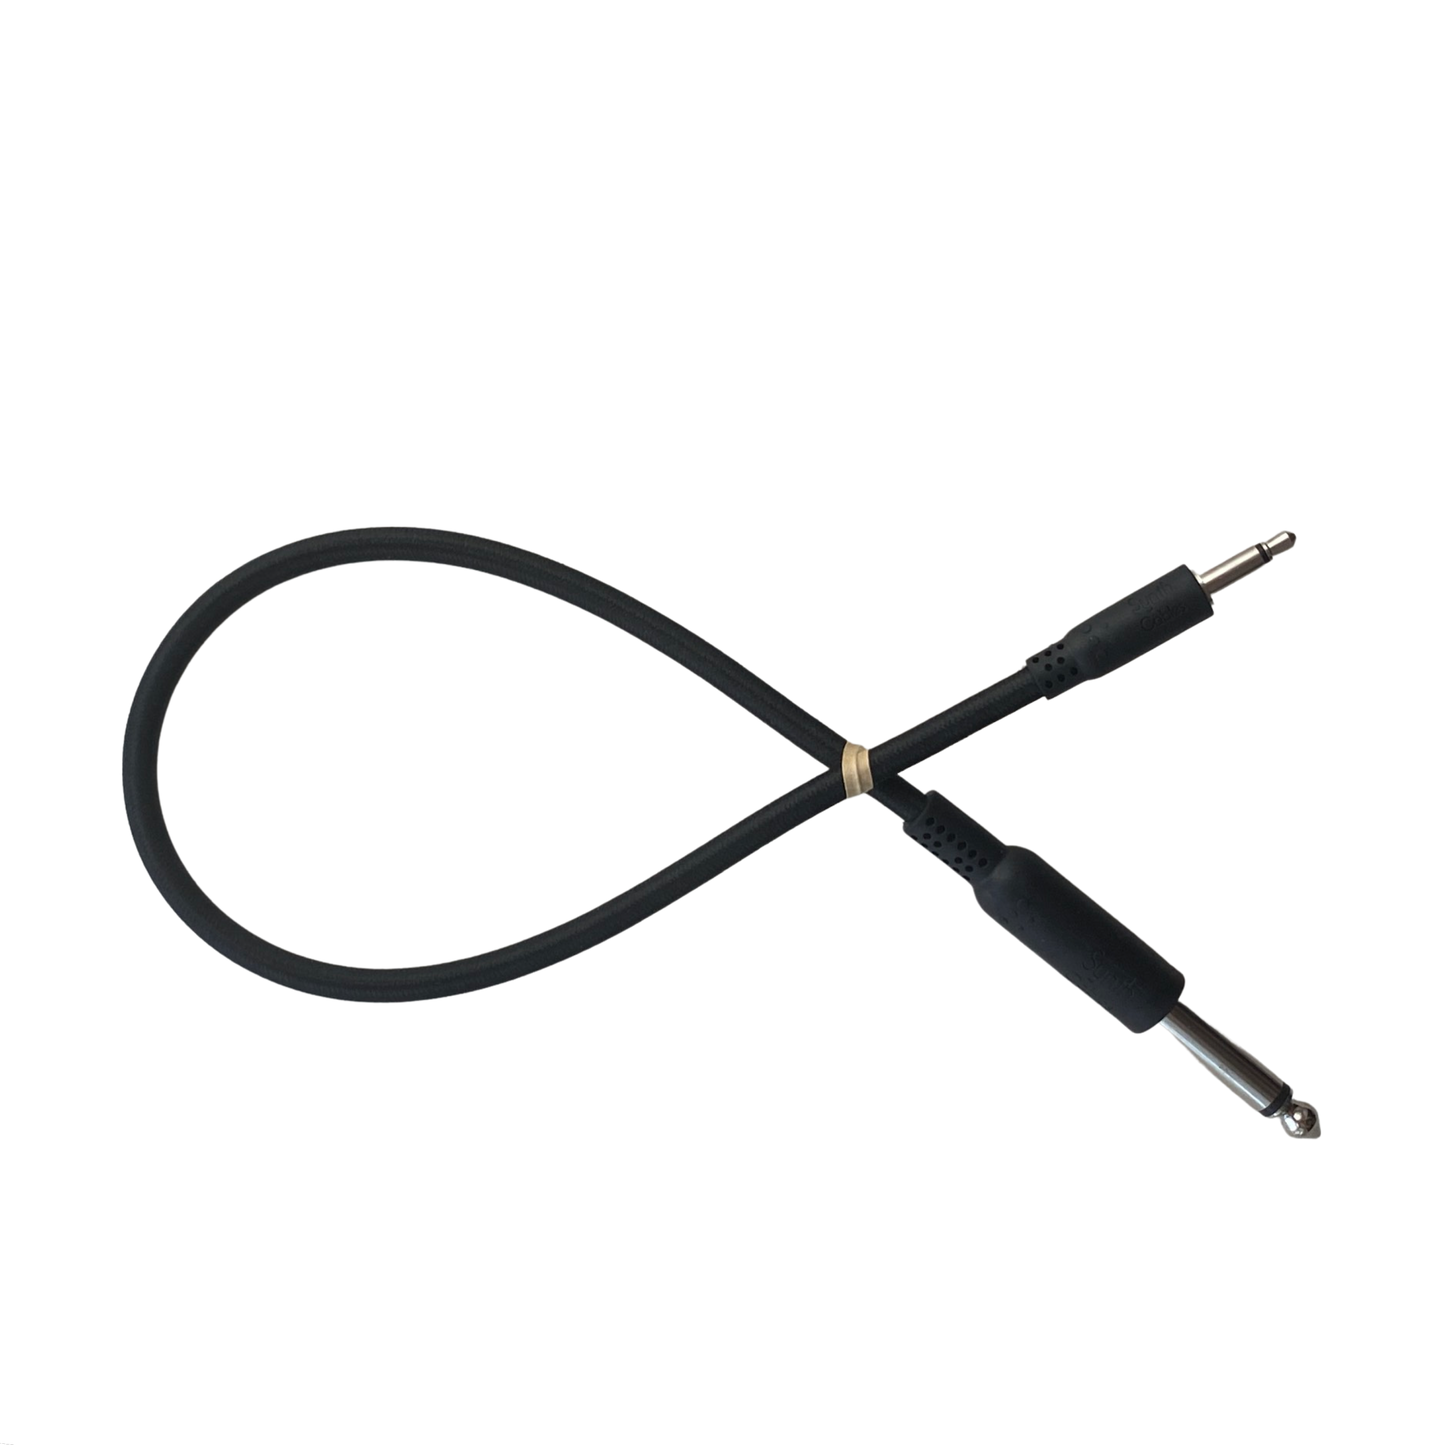 6.5mm to 3.5mm Adaptor Cable